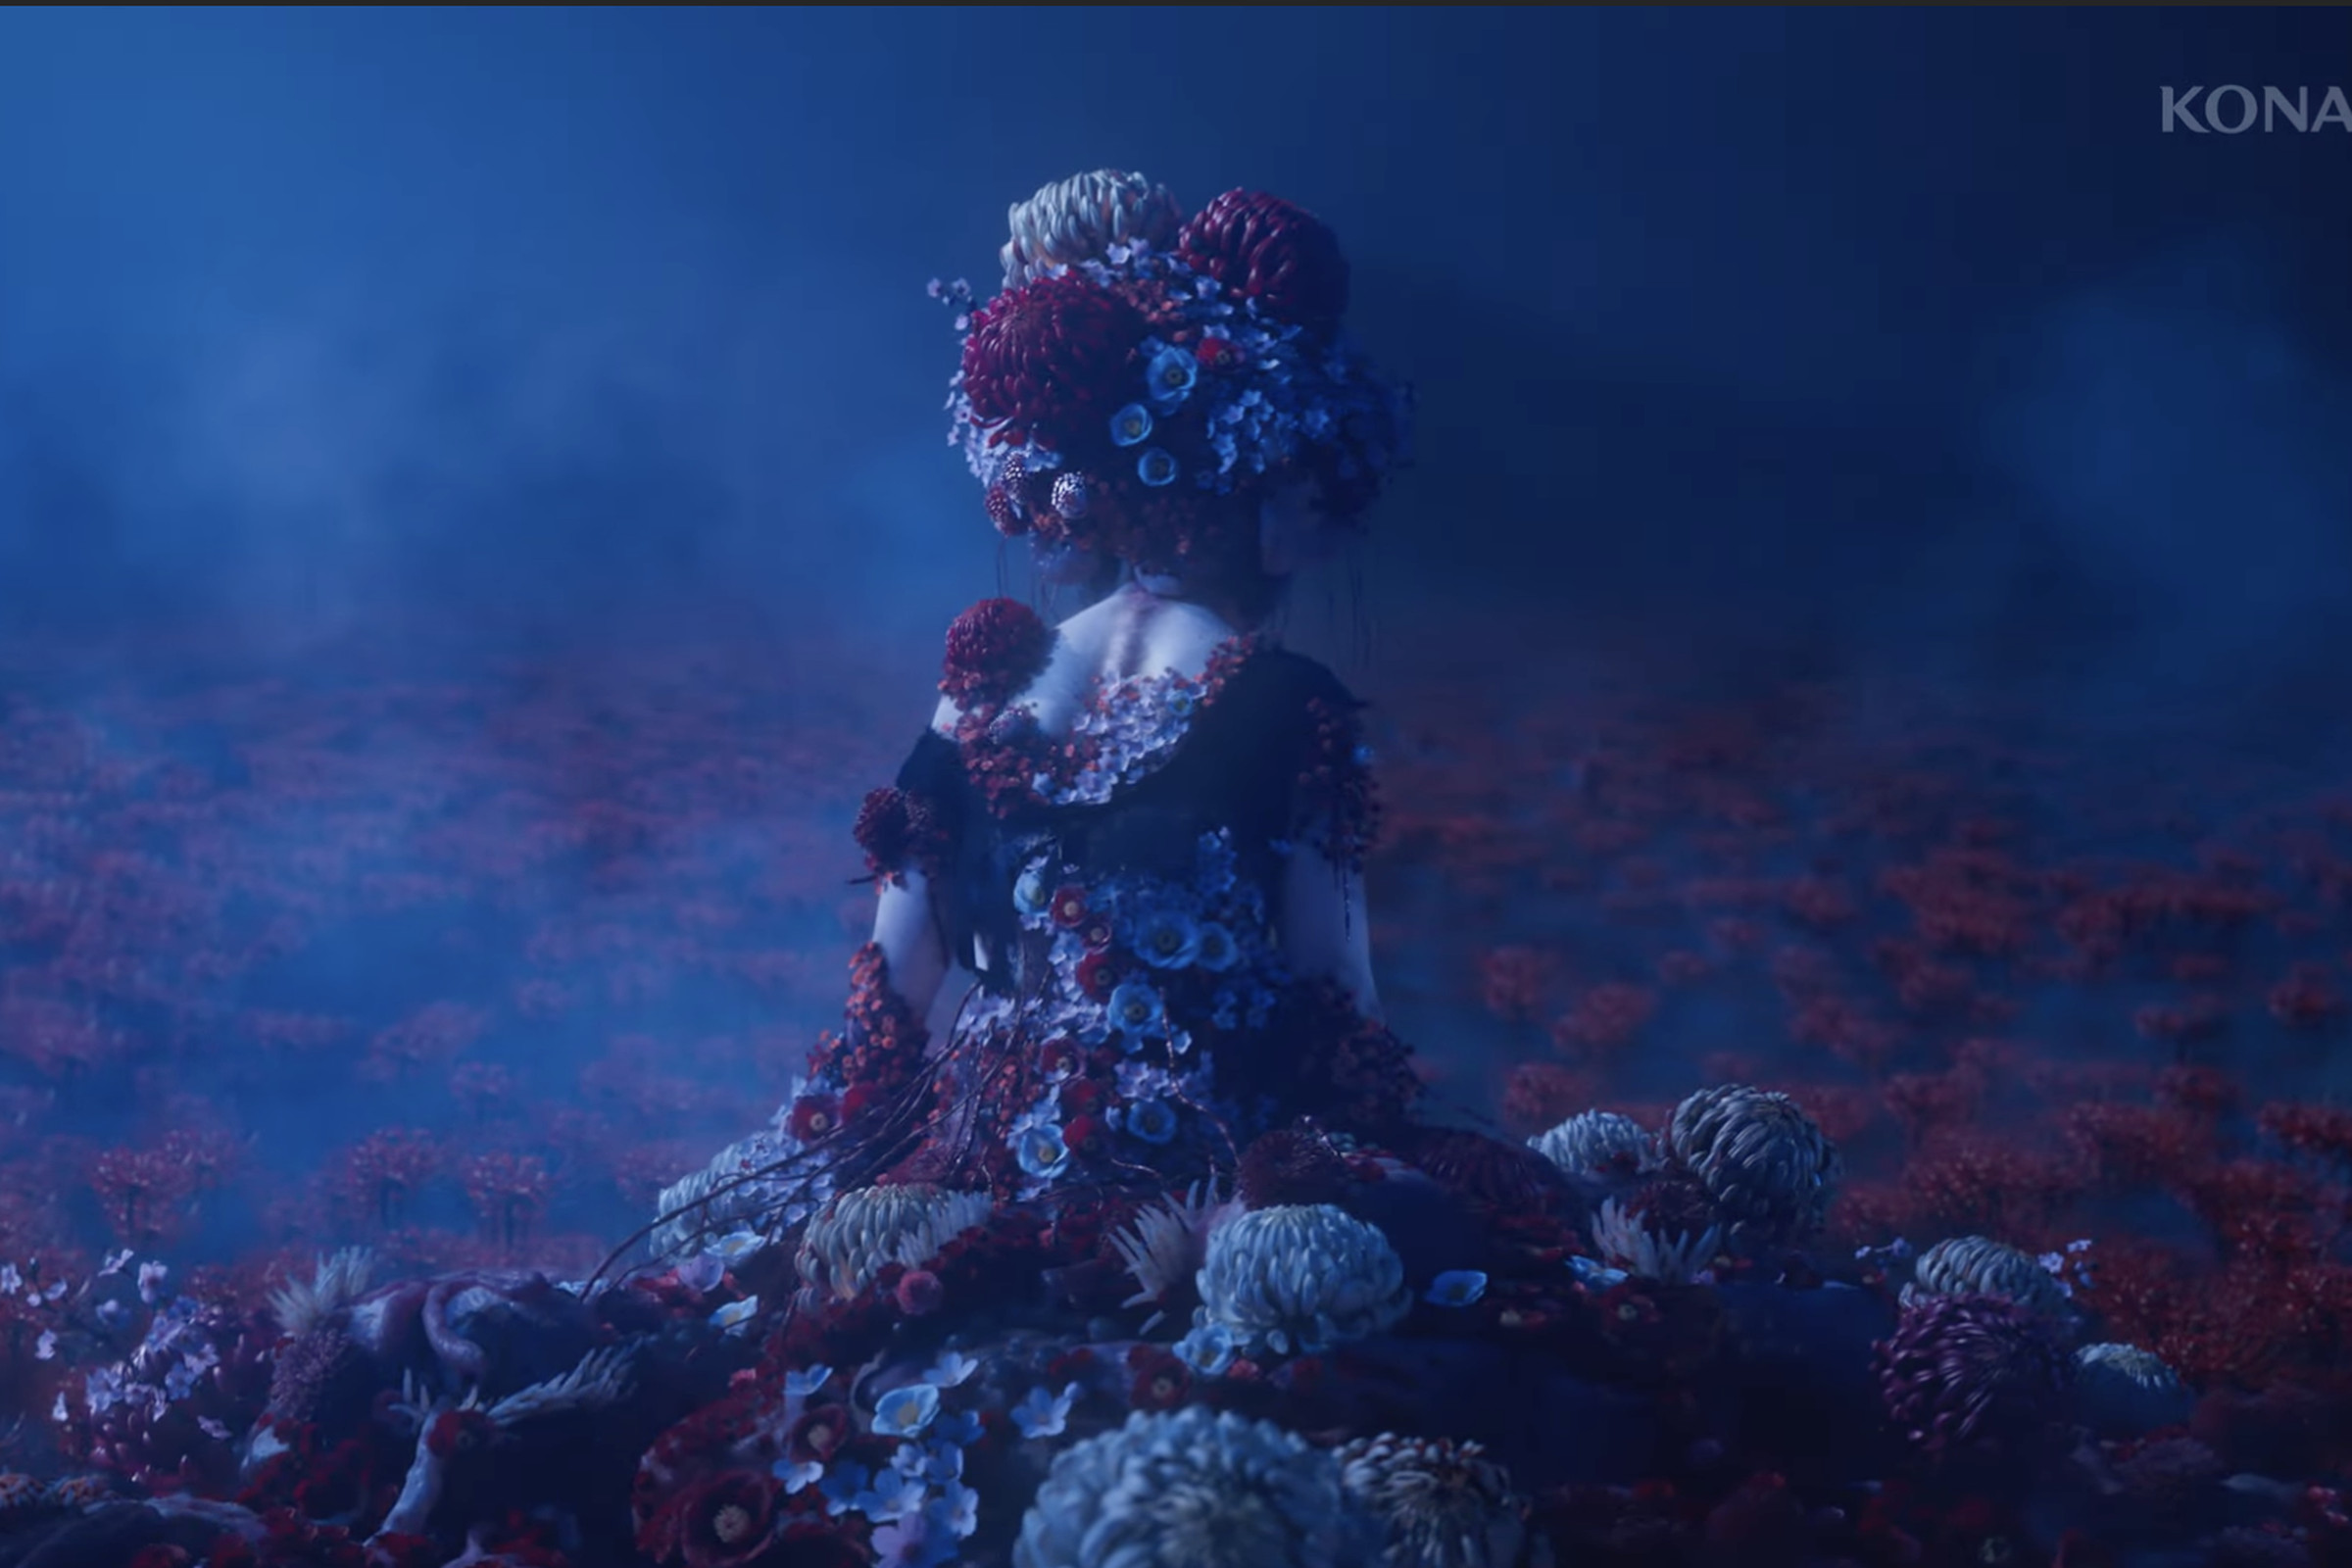 Screenshot from Silent Hill F trailer featuring a girl covered in flowers and fungi growing from her body